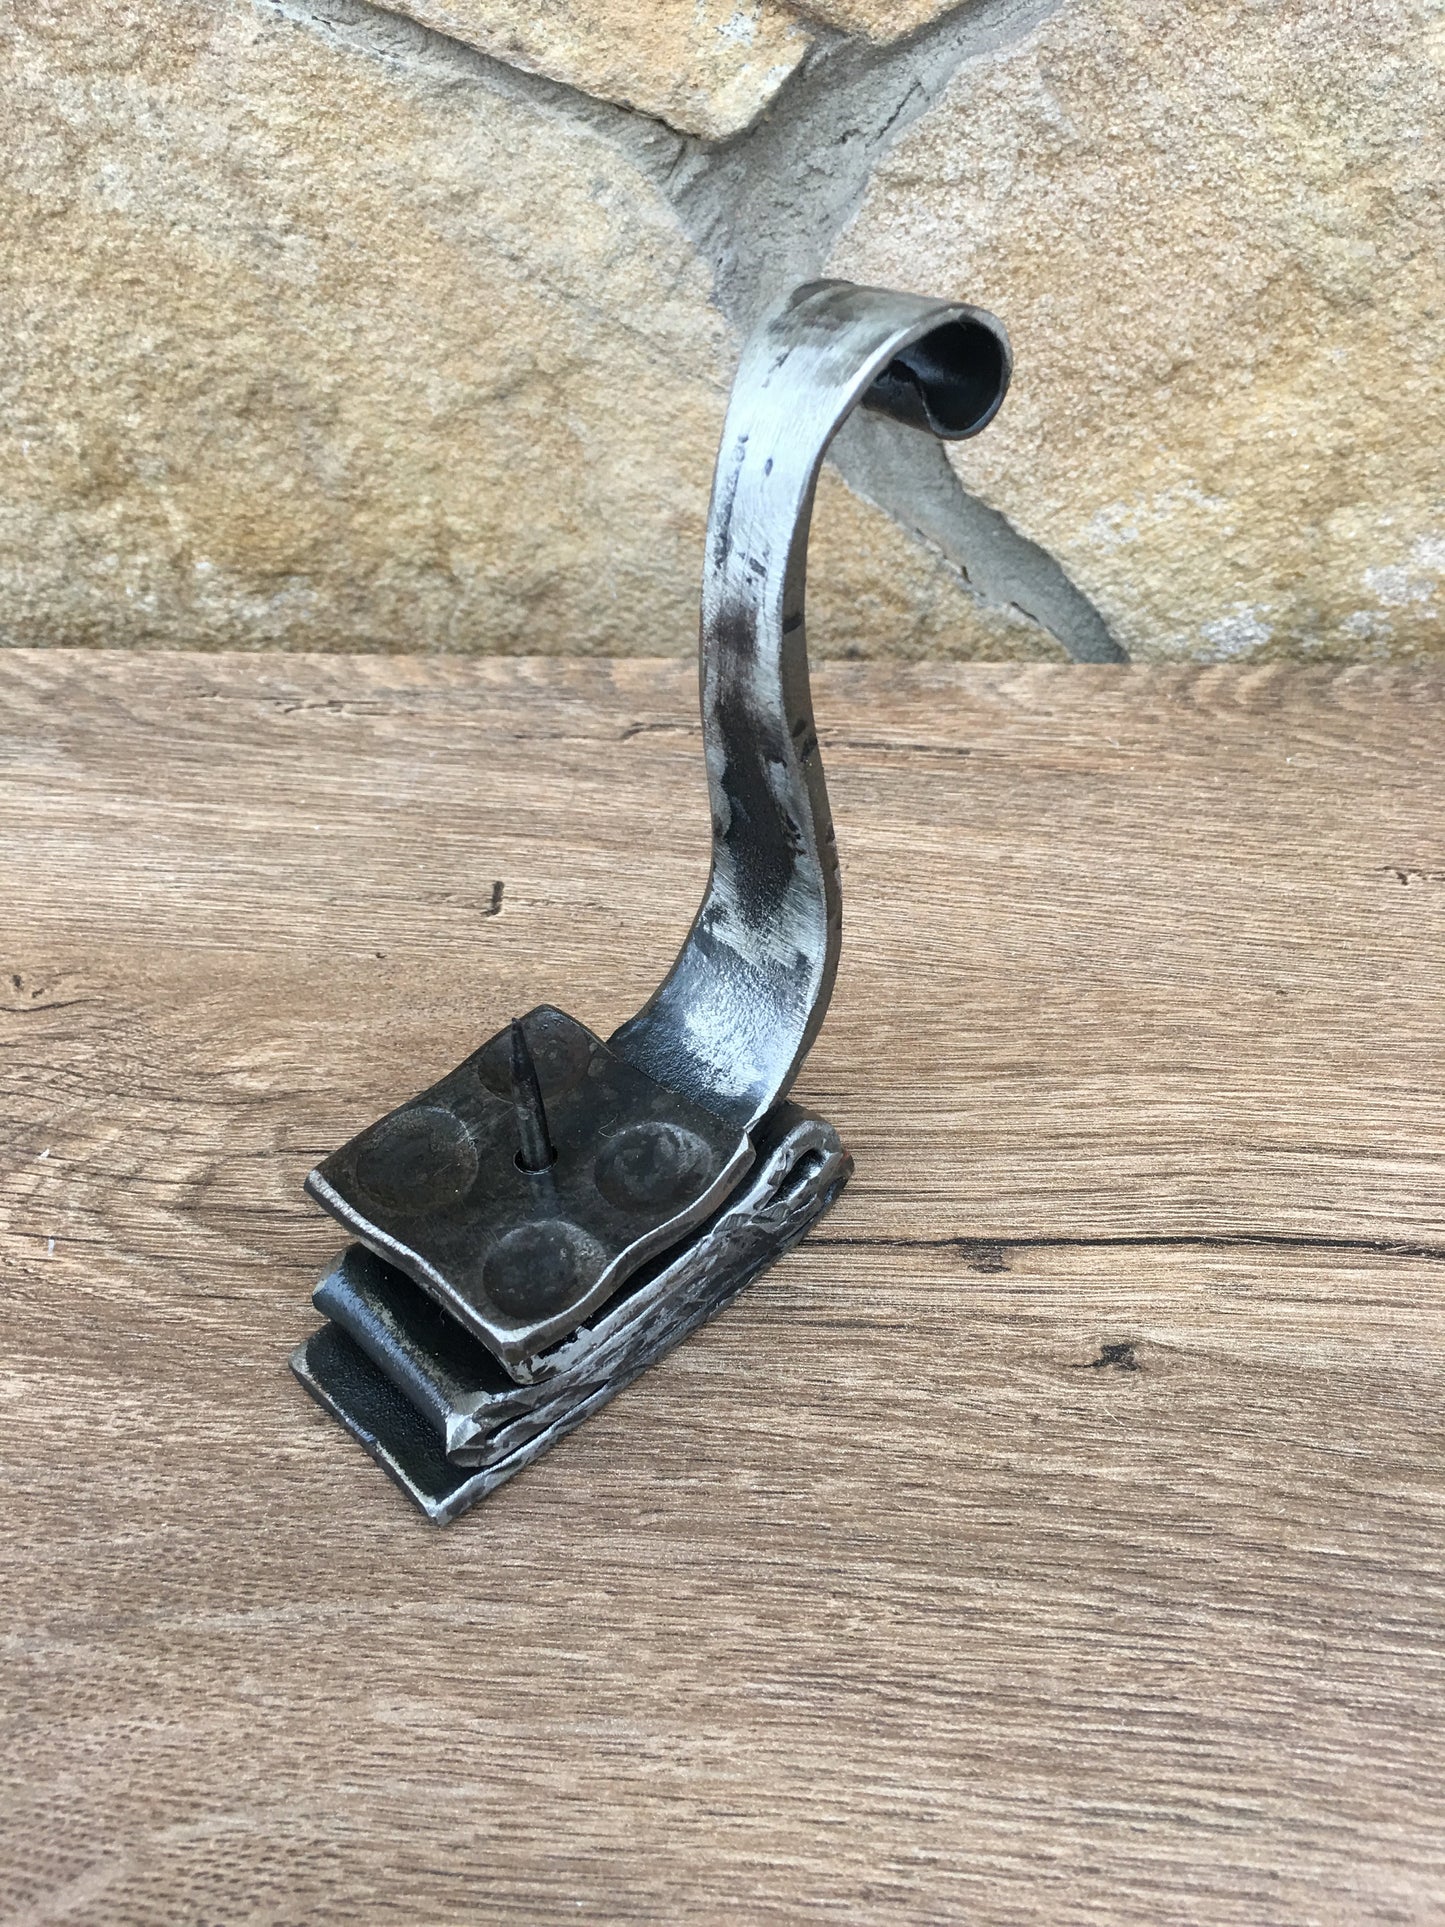 Wrought iron candle holder, hand forged candle holder, iron anniversary gift for her, iron anniversary gift for him, candlestick holder